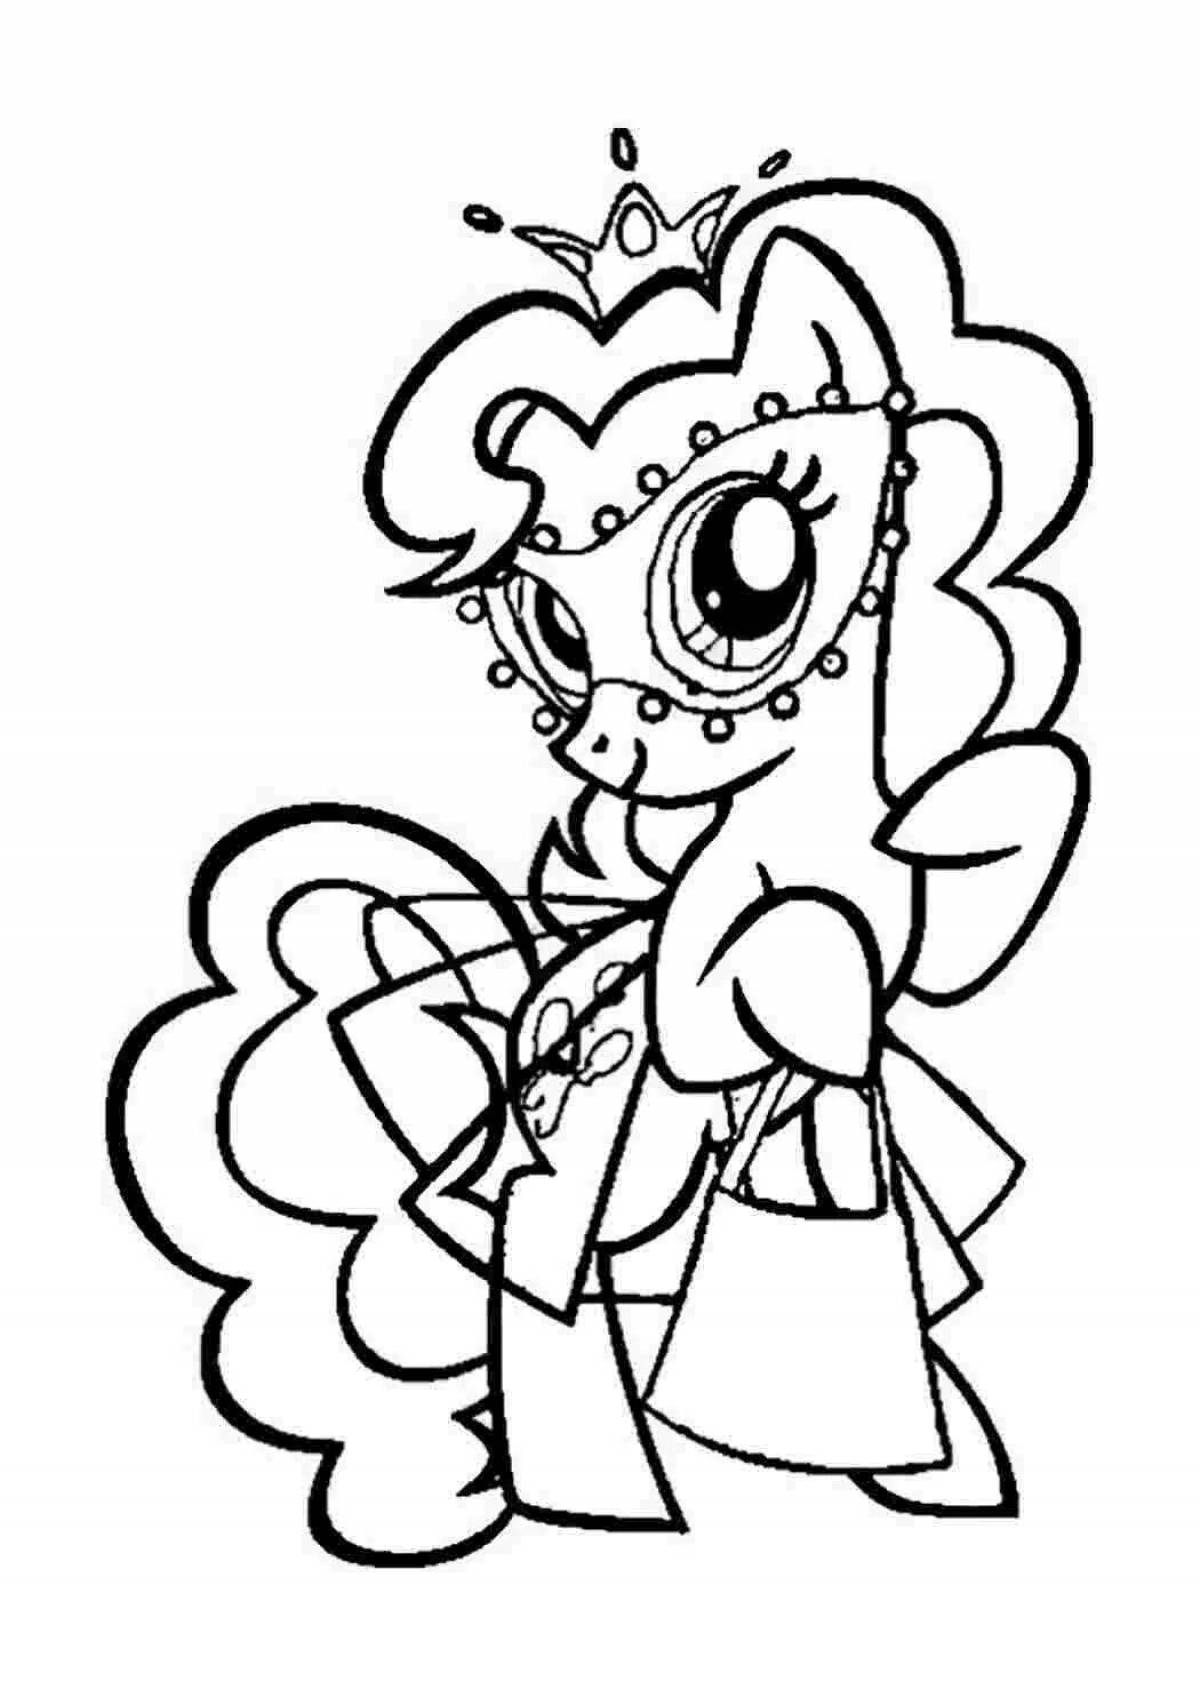 Pinkie Pie's adorable coloring book for girls